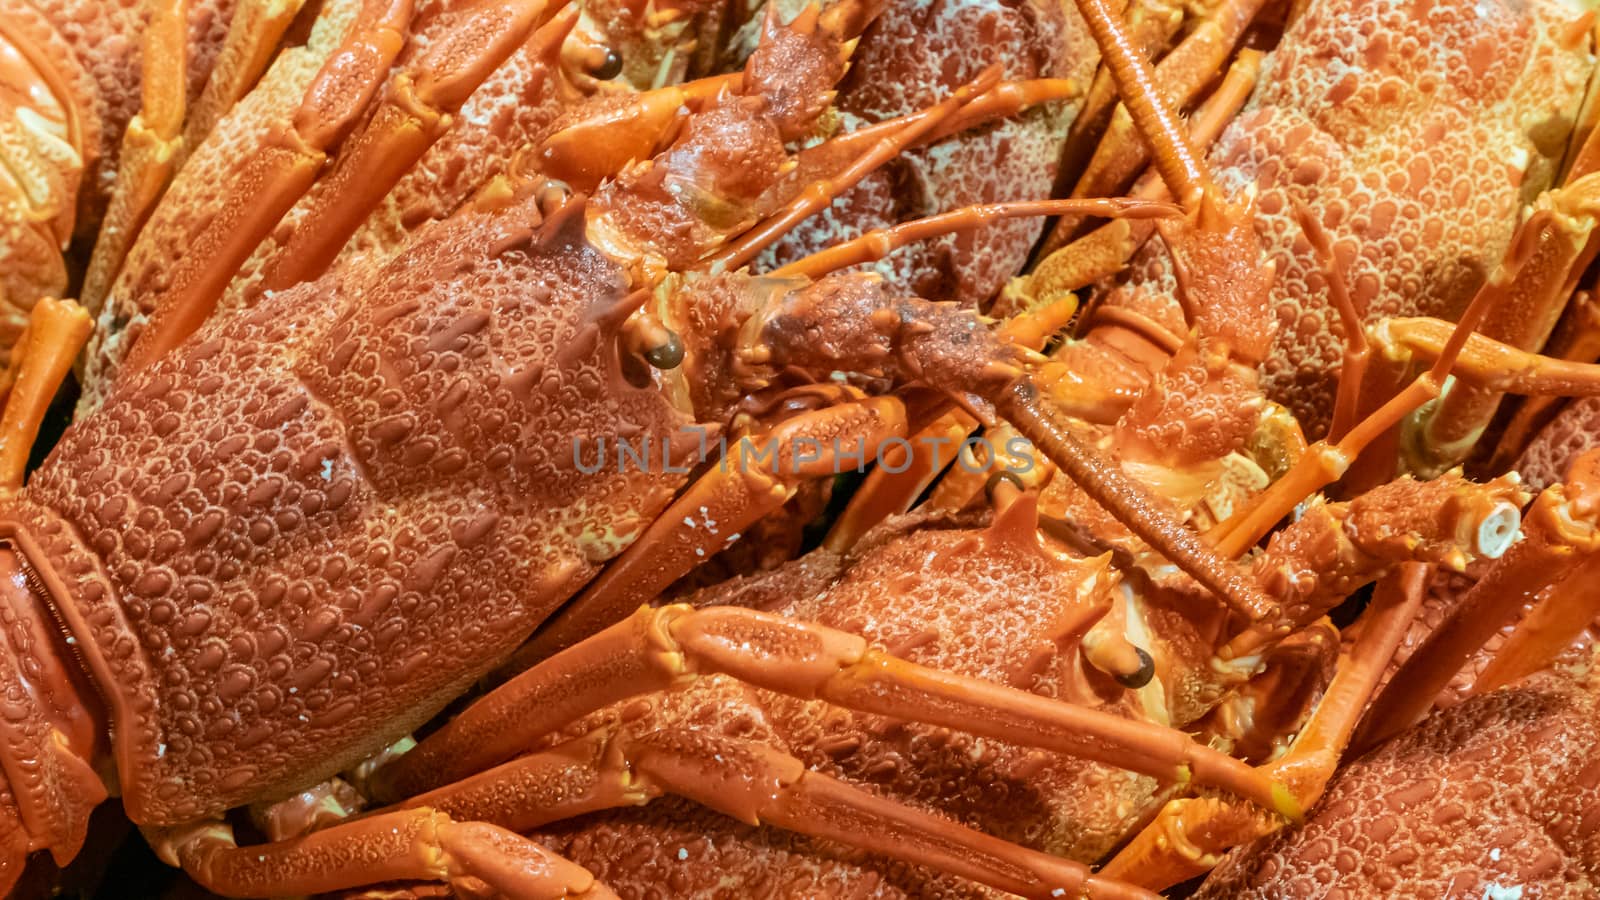 The close up of fresh lobsters seafood at Taipei fish market in Taiwan.